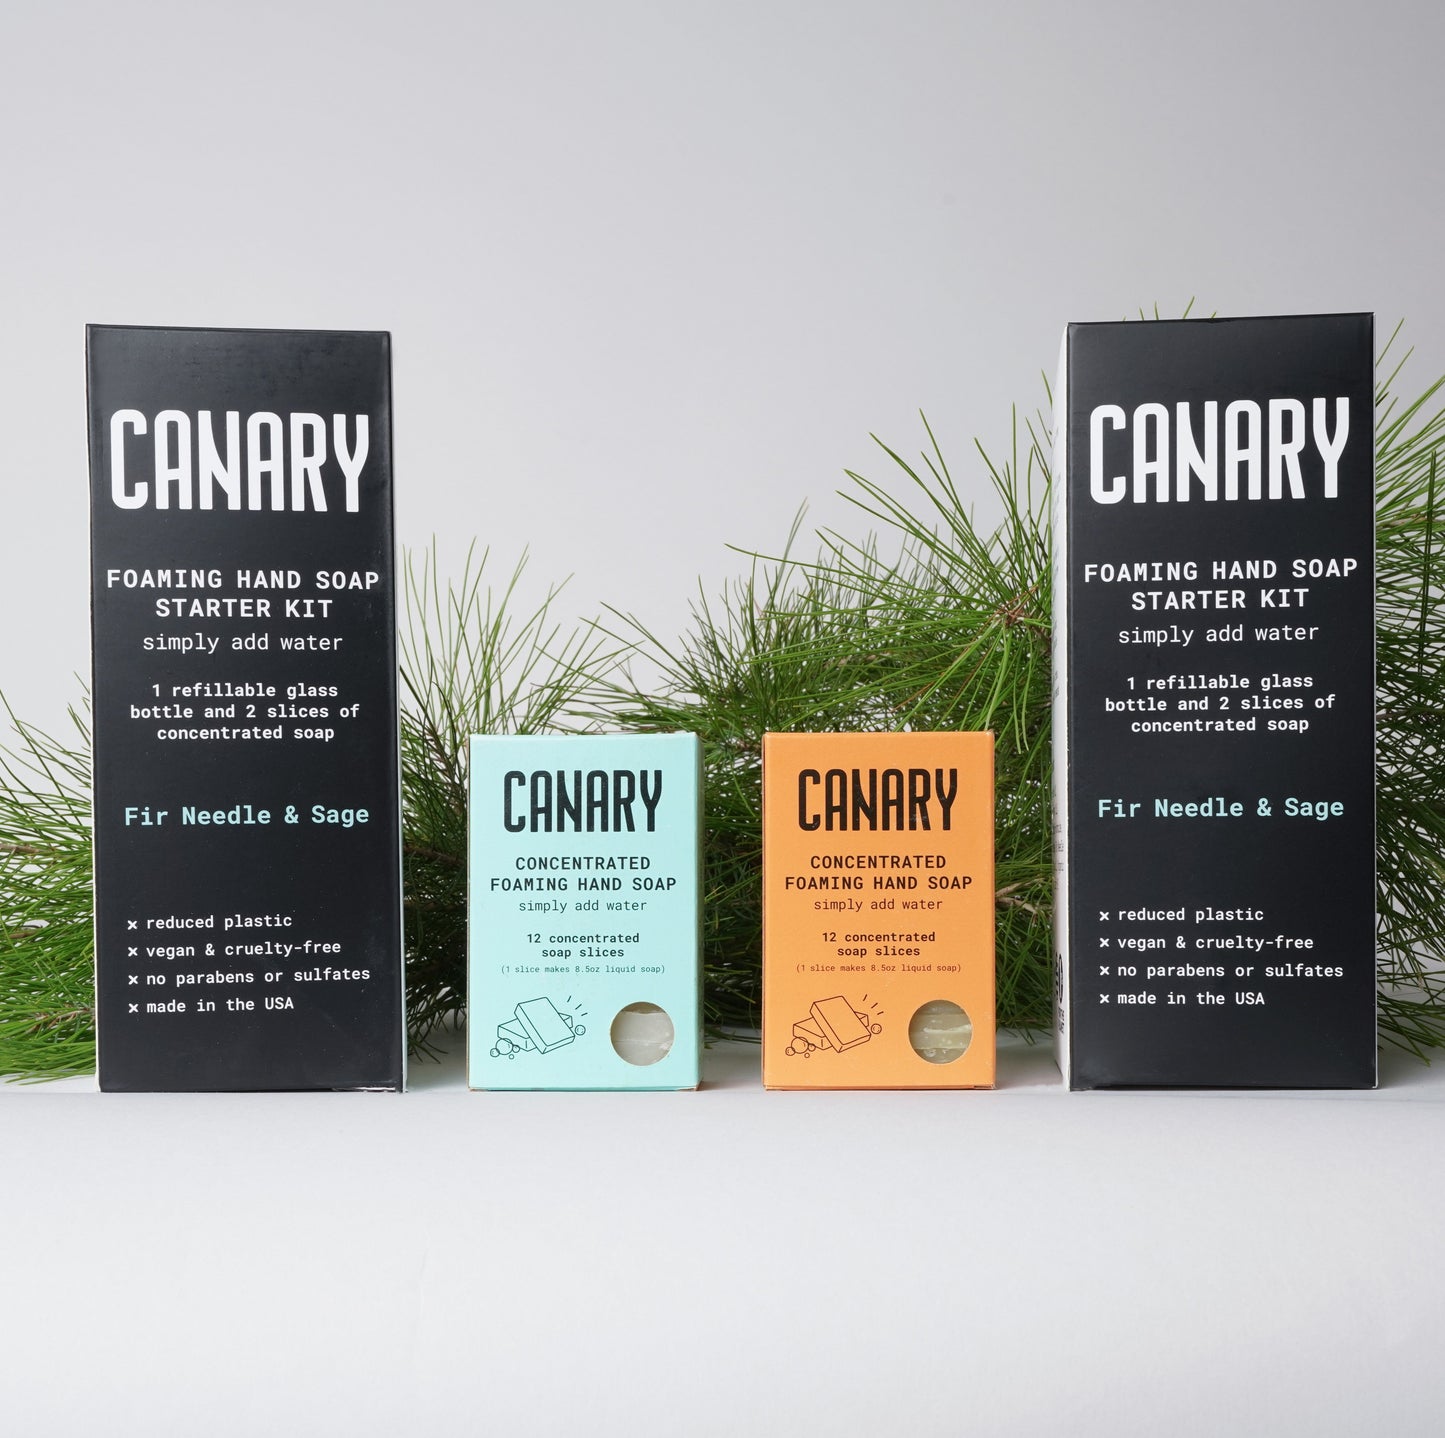 concentrated foaming hand soap bundle by canary